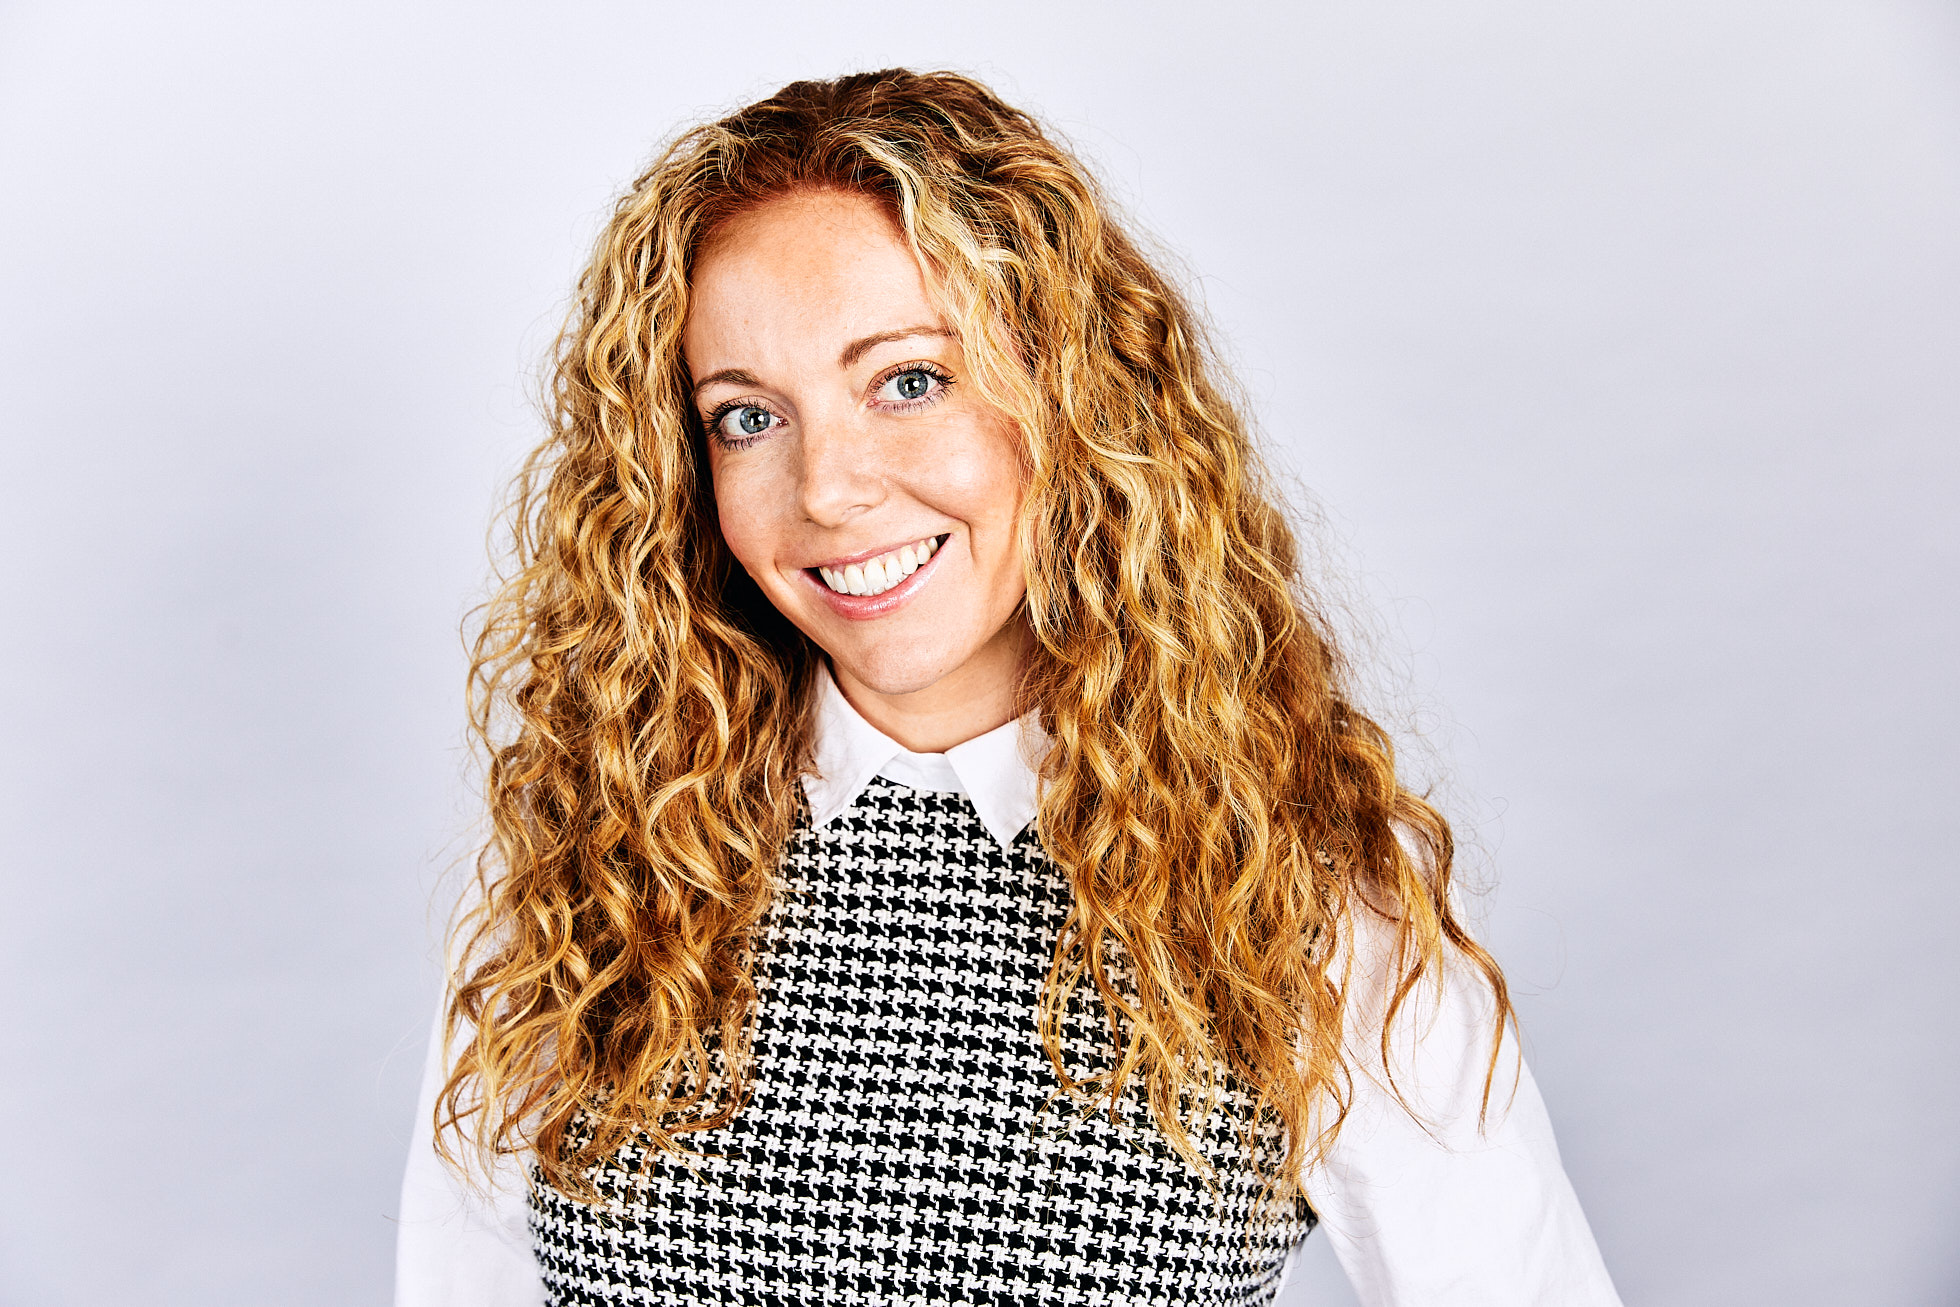 Business headshot of young professional woman with long dark blonde curly hair.  Wearing white blouse with collar and black and white checked dress